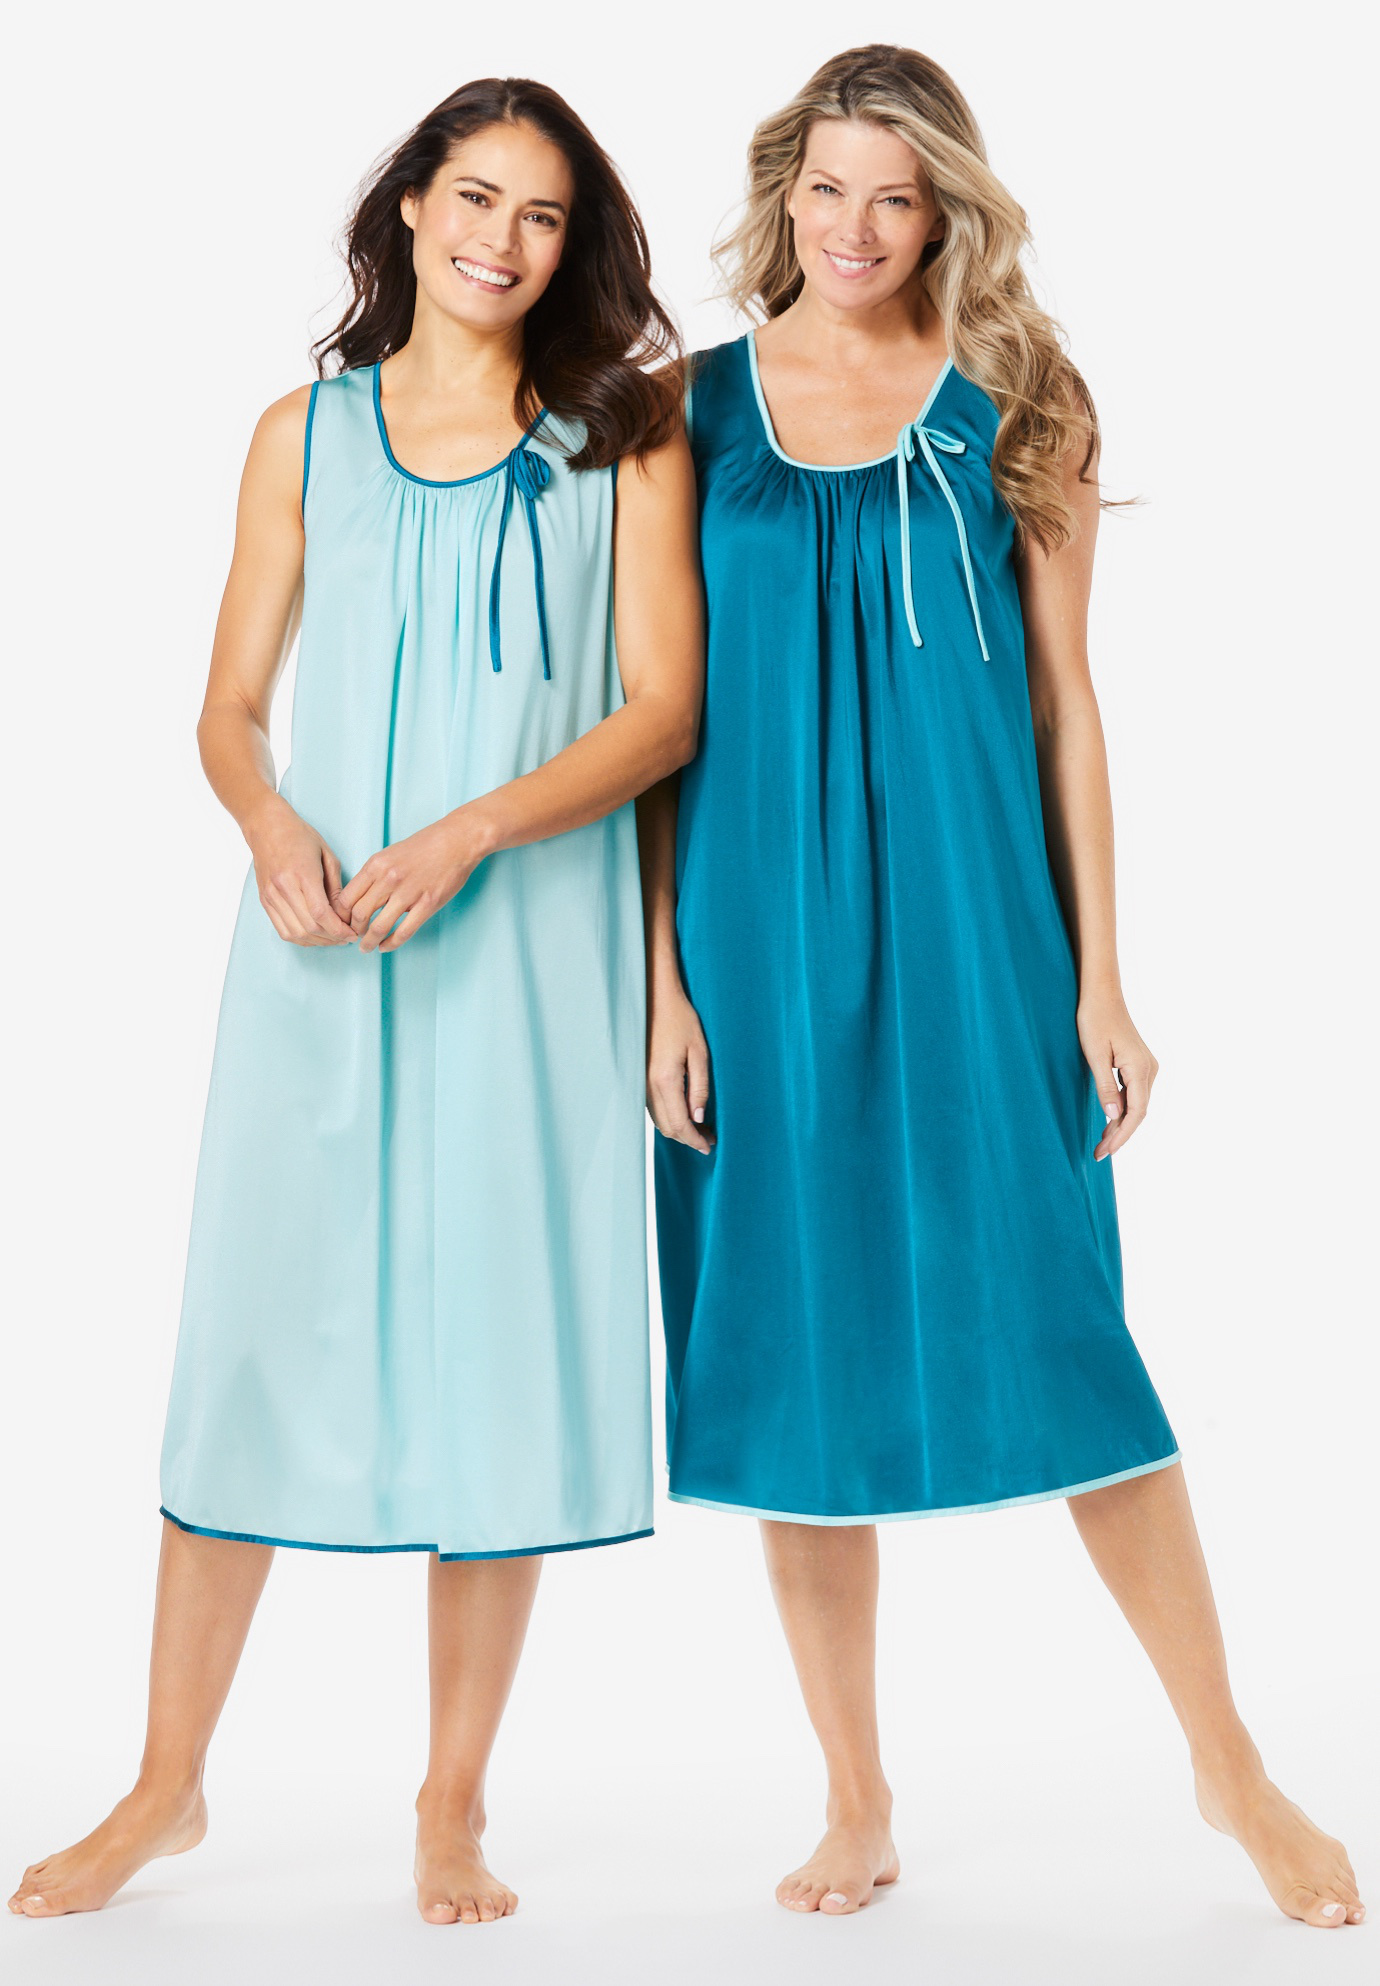 Plus-Size Clothing Only Necessities Womens Plus Size Full-Sweep Nightgown